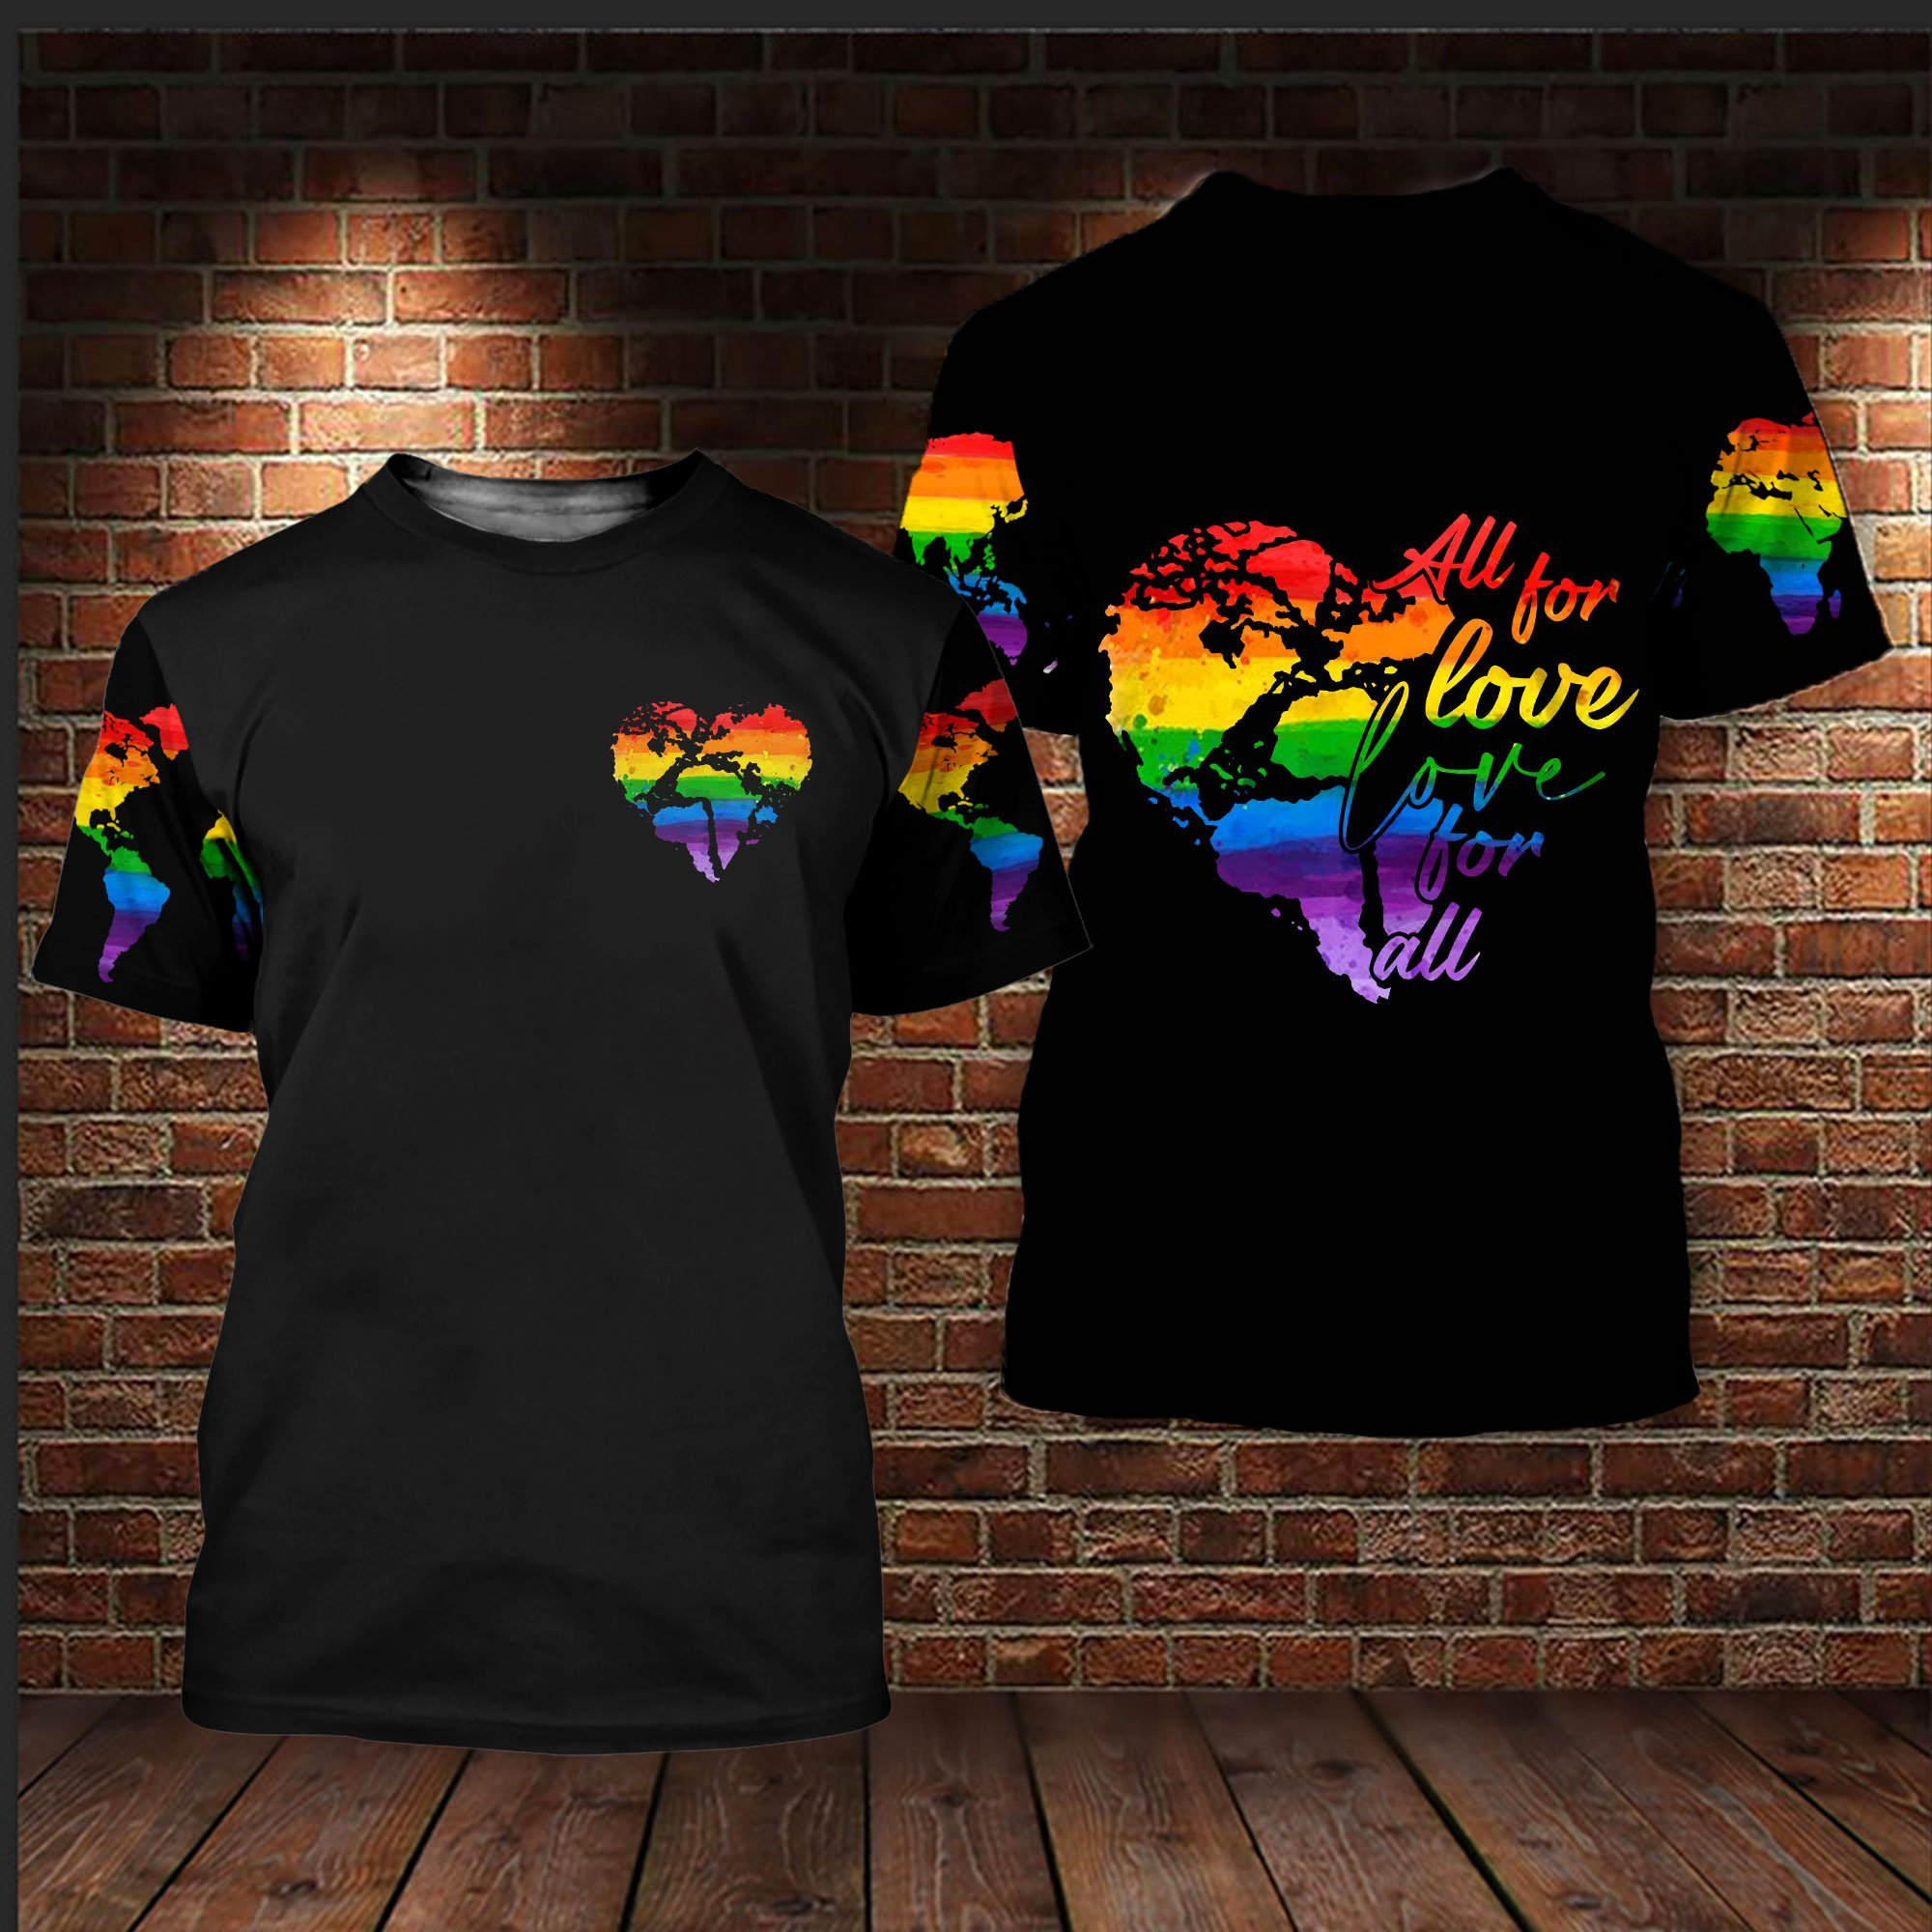 LGBT Pride All For Love Love For All 3D All Over Printed Shirt For LGBT Pride Month/ Gift For Gay Man